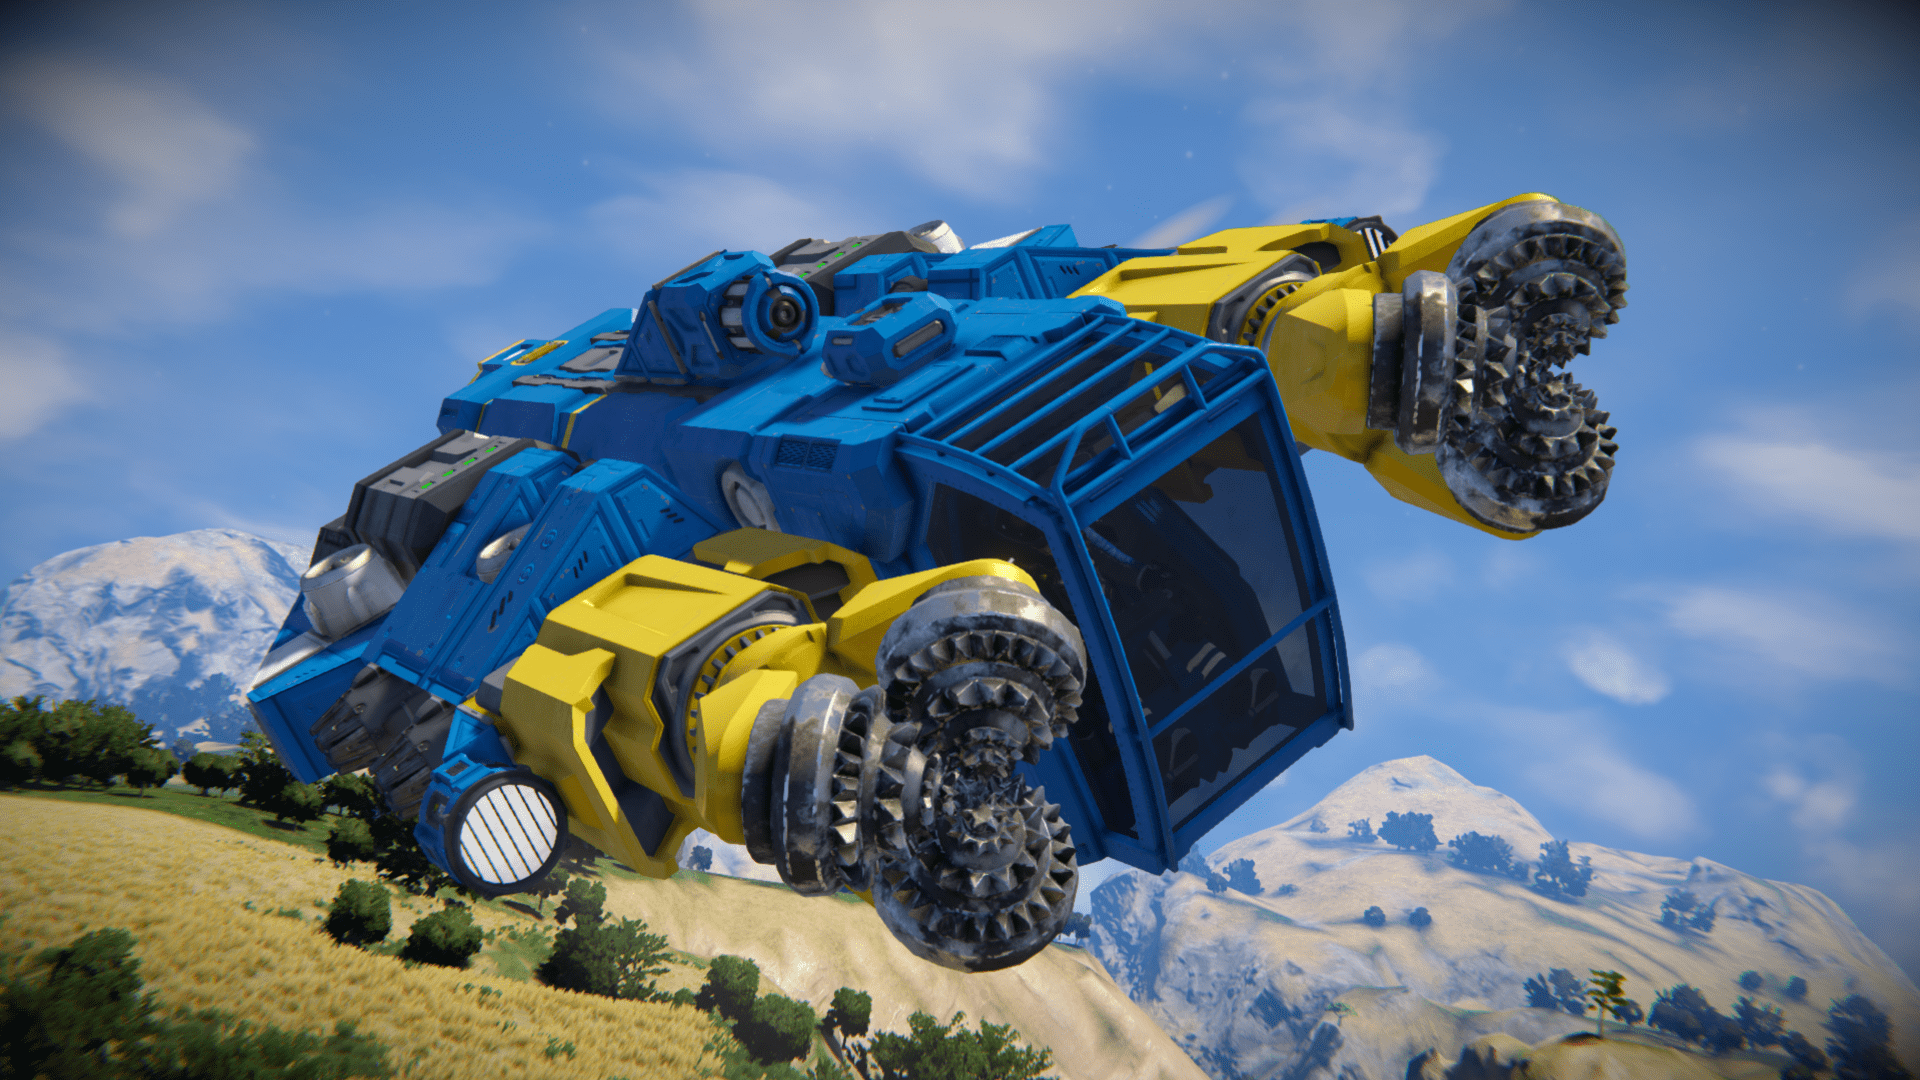 HD wallpaper of a blue and yellow space rover concept from Space Engineers video game, set against a mountainous landscape background ideal for desktops.